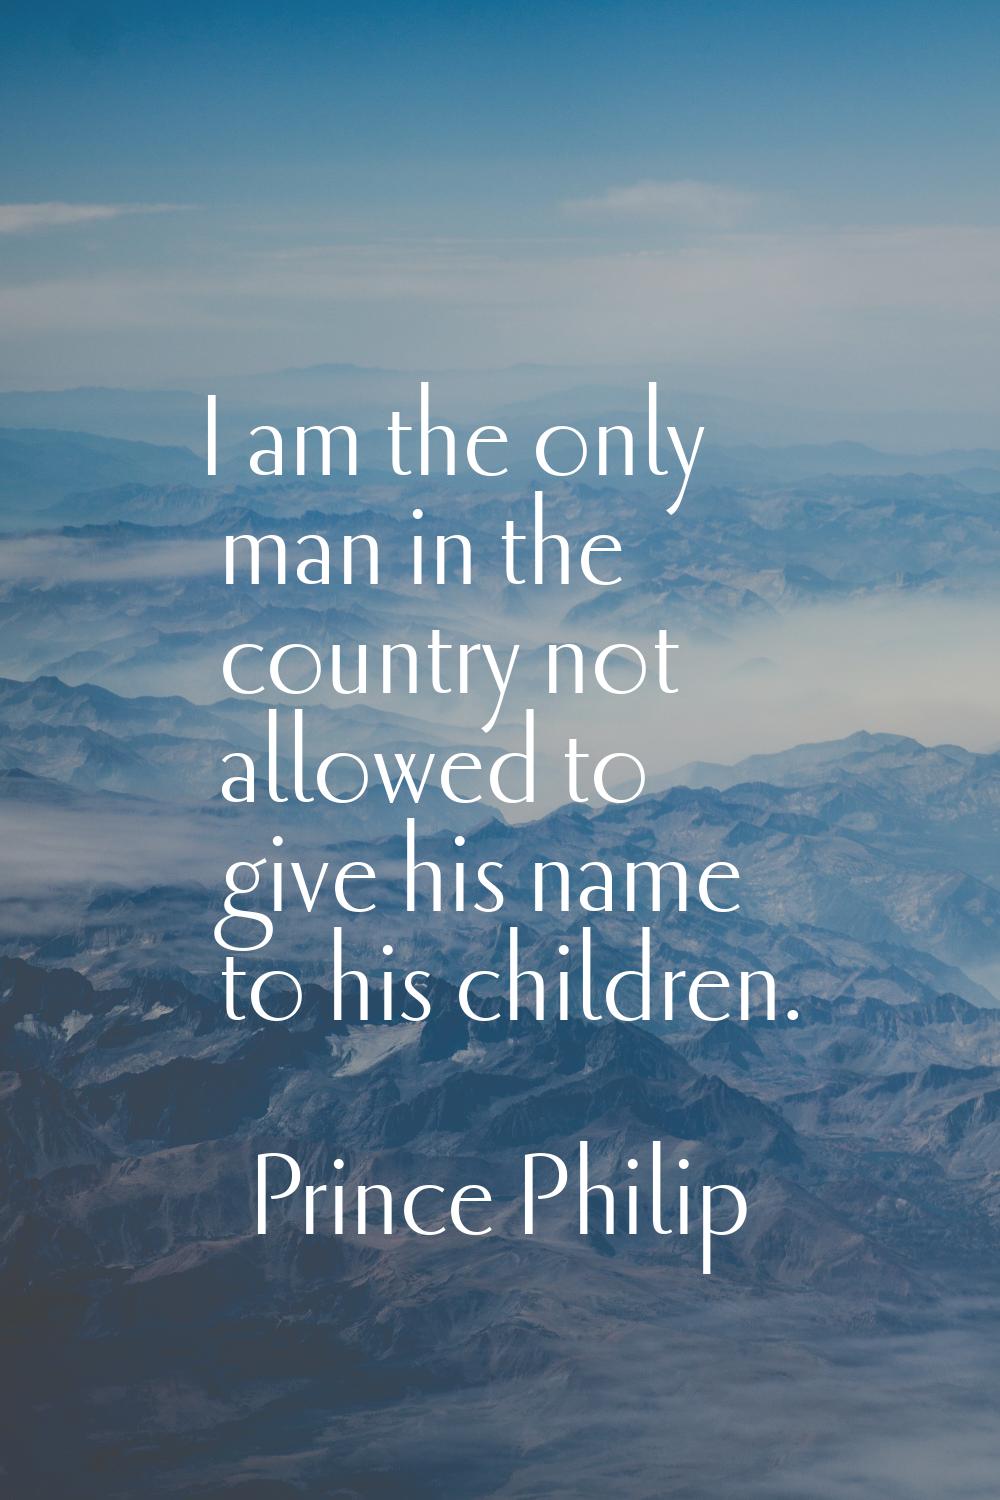 I am the only man in the country not allowed to give his name to his children.